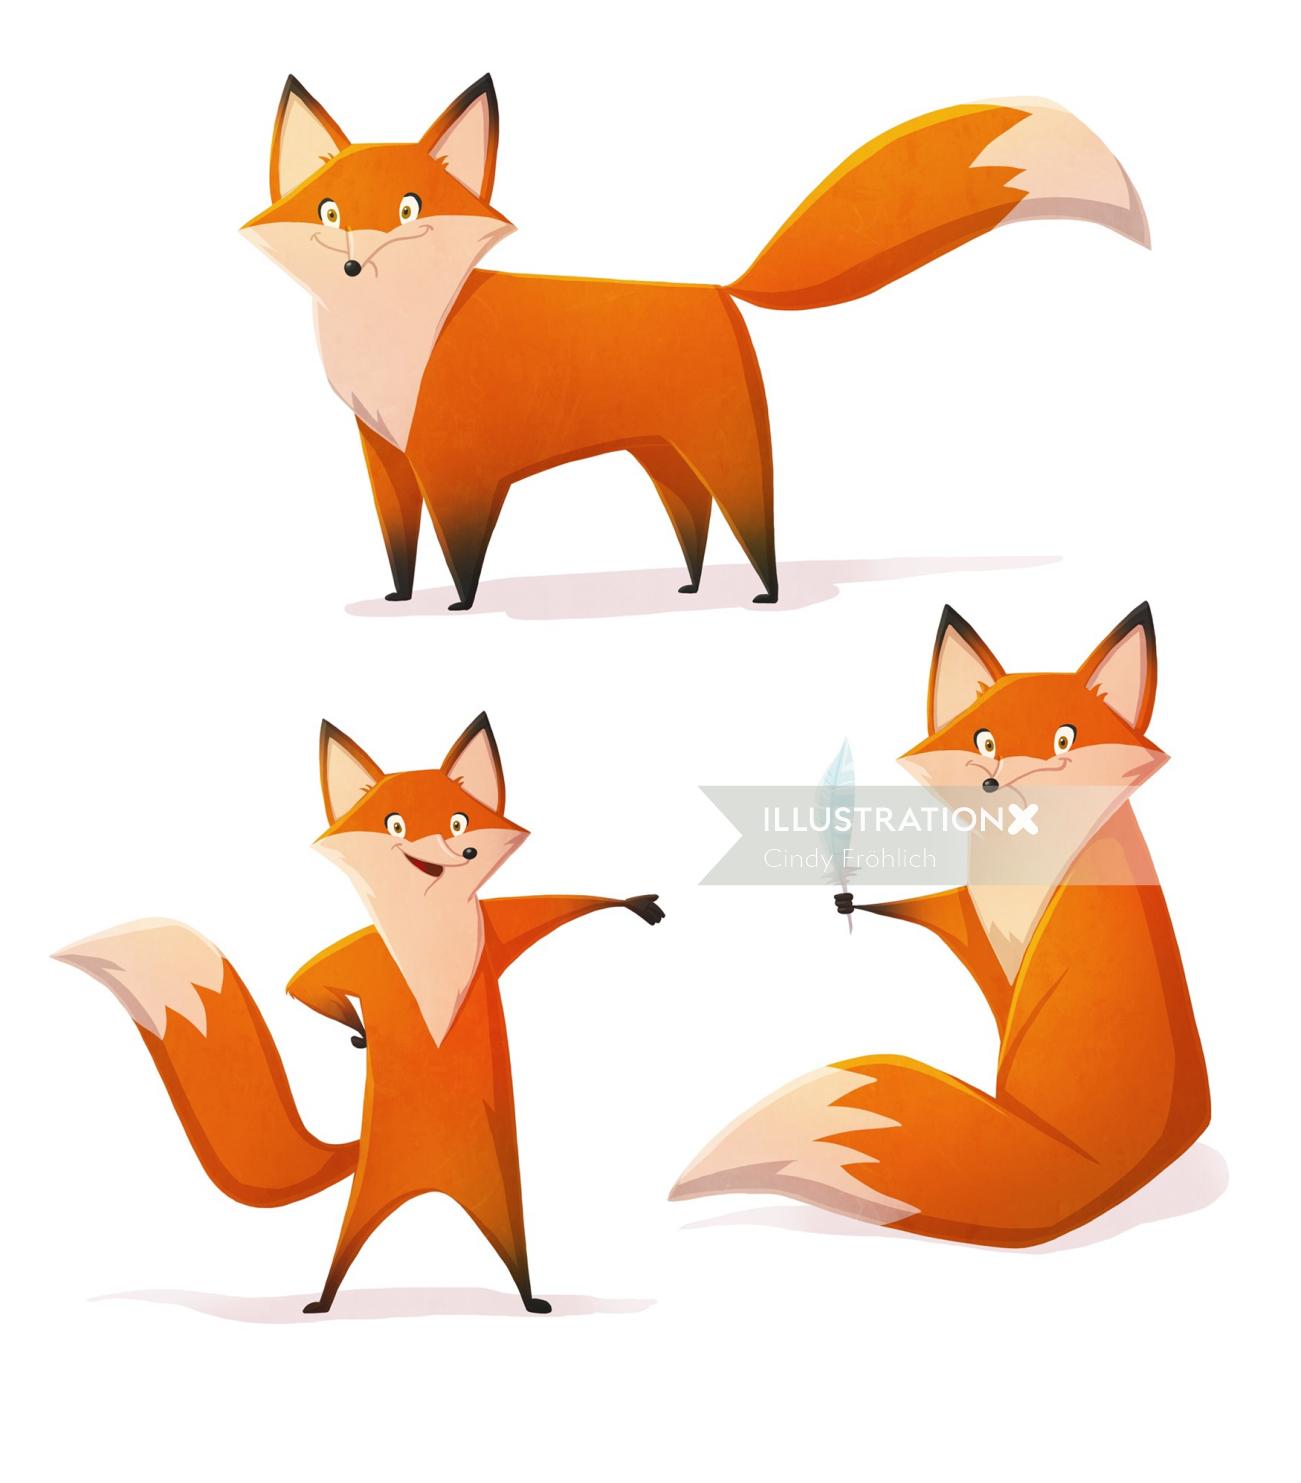 Animal character red fox
